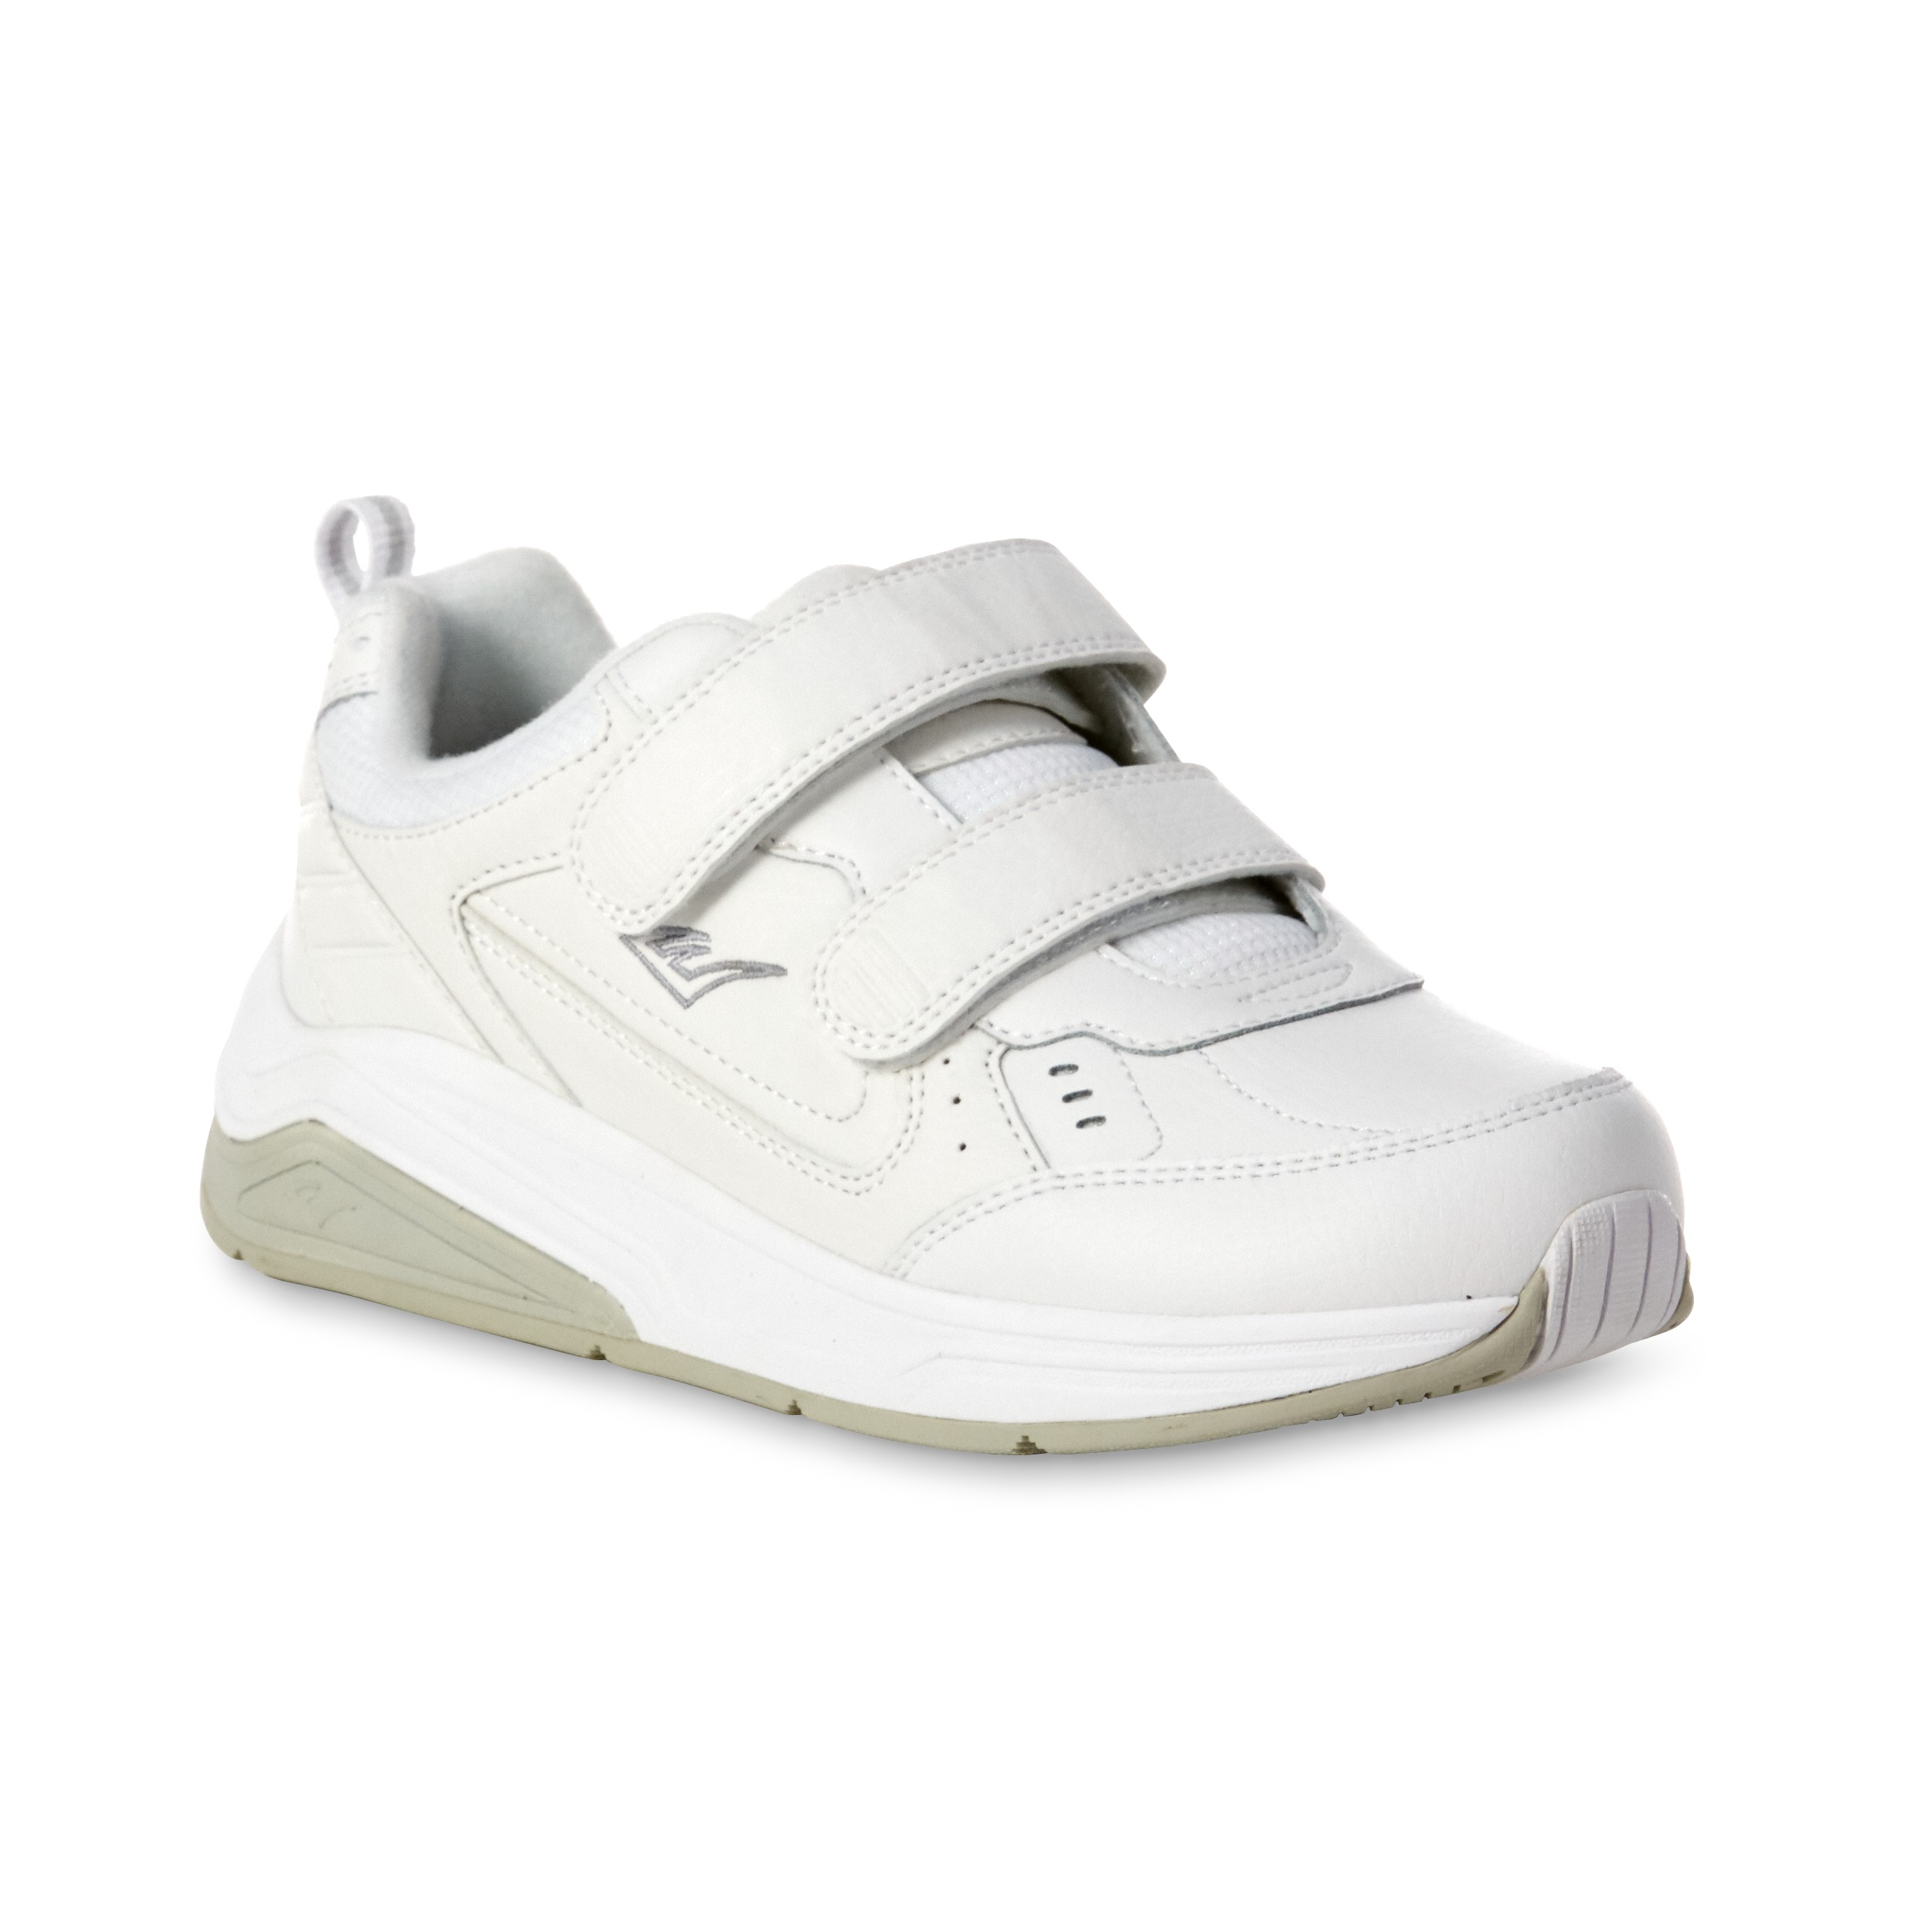 Everlast Womens Eleanor White Athletic Shoe Wide Width Size 8 image